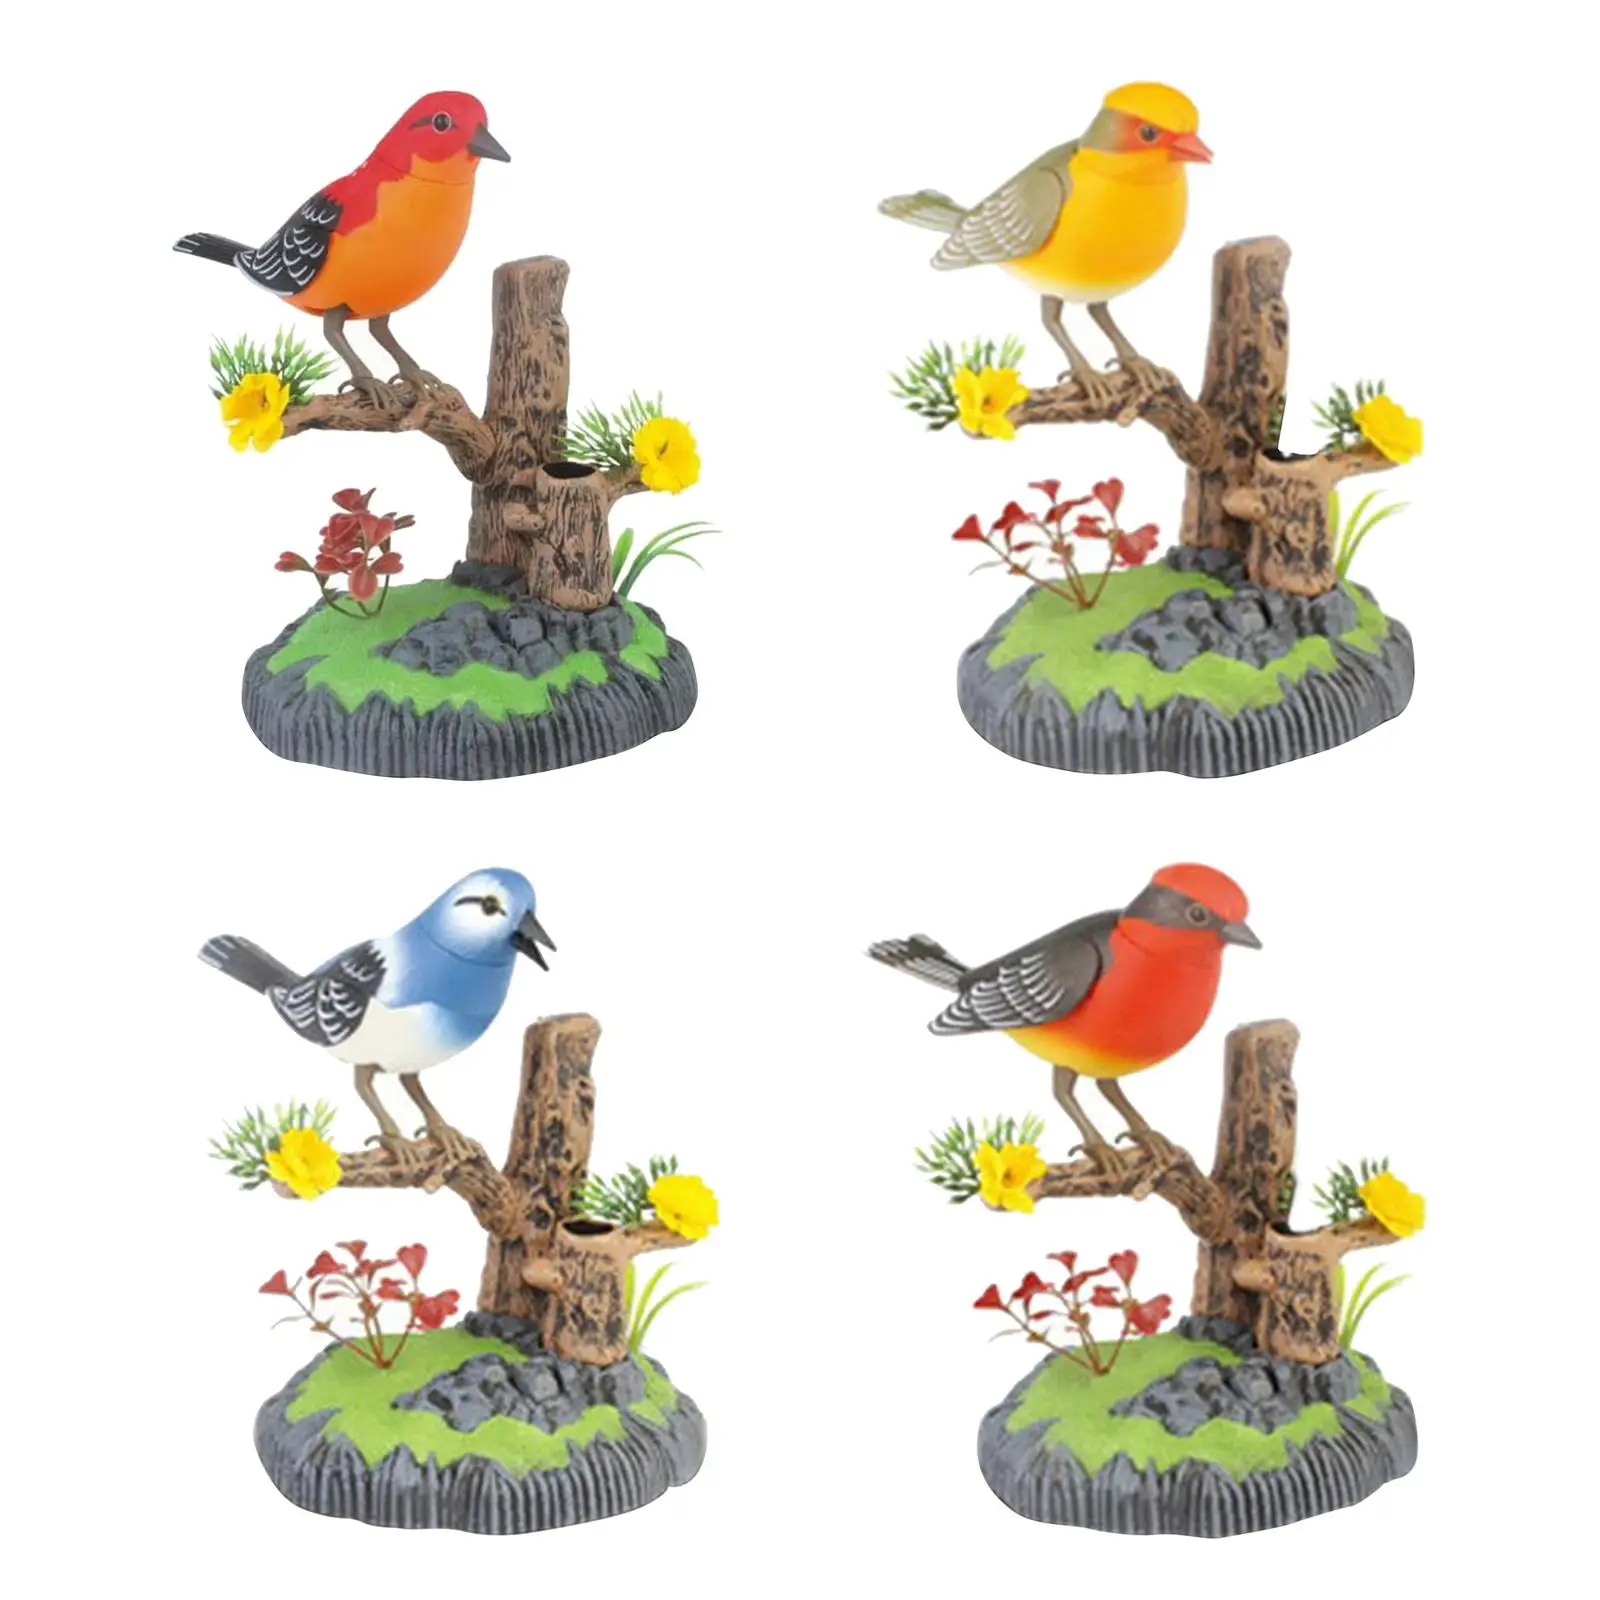 Singing and Chirping Birds   Ornament Battery Operated Voice-Activated Bird for home and garden Decor